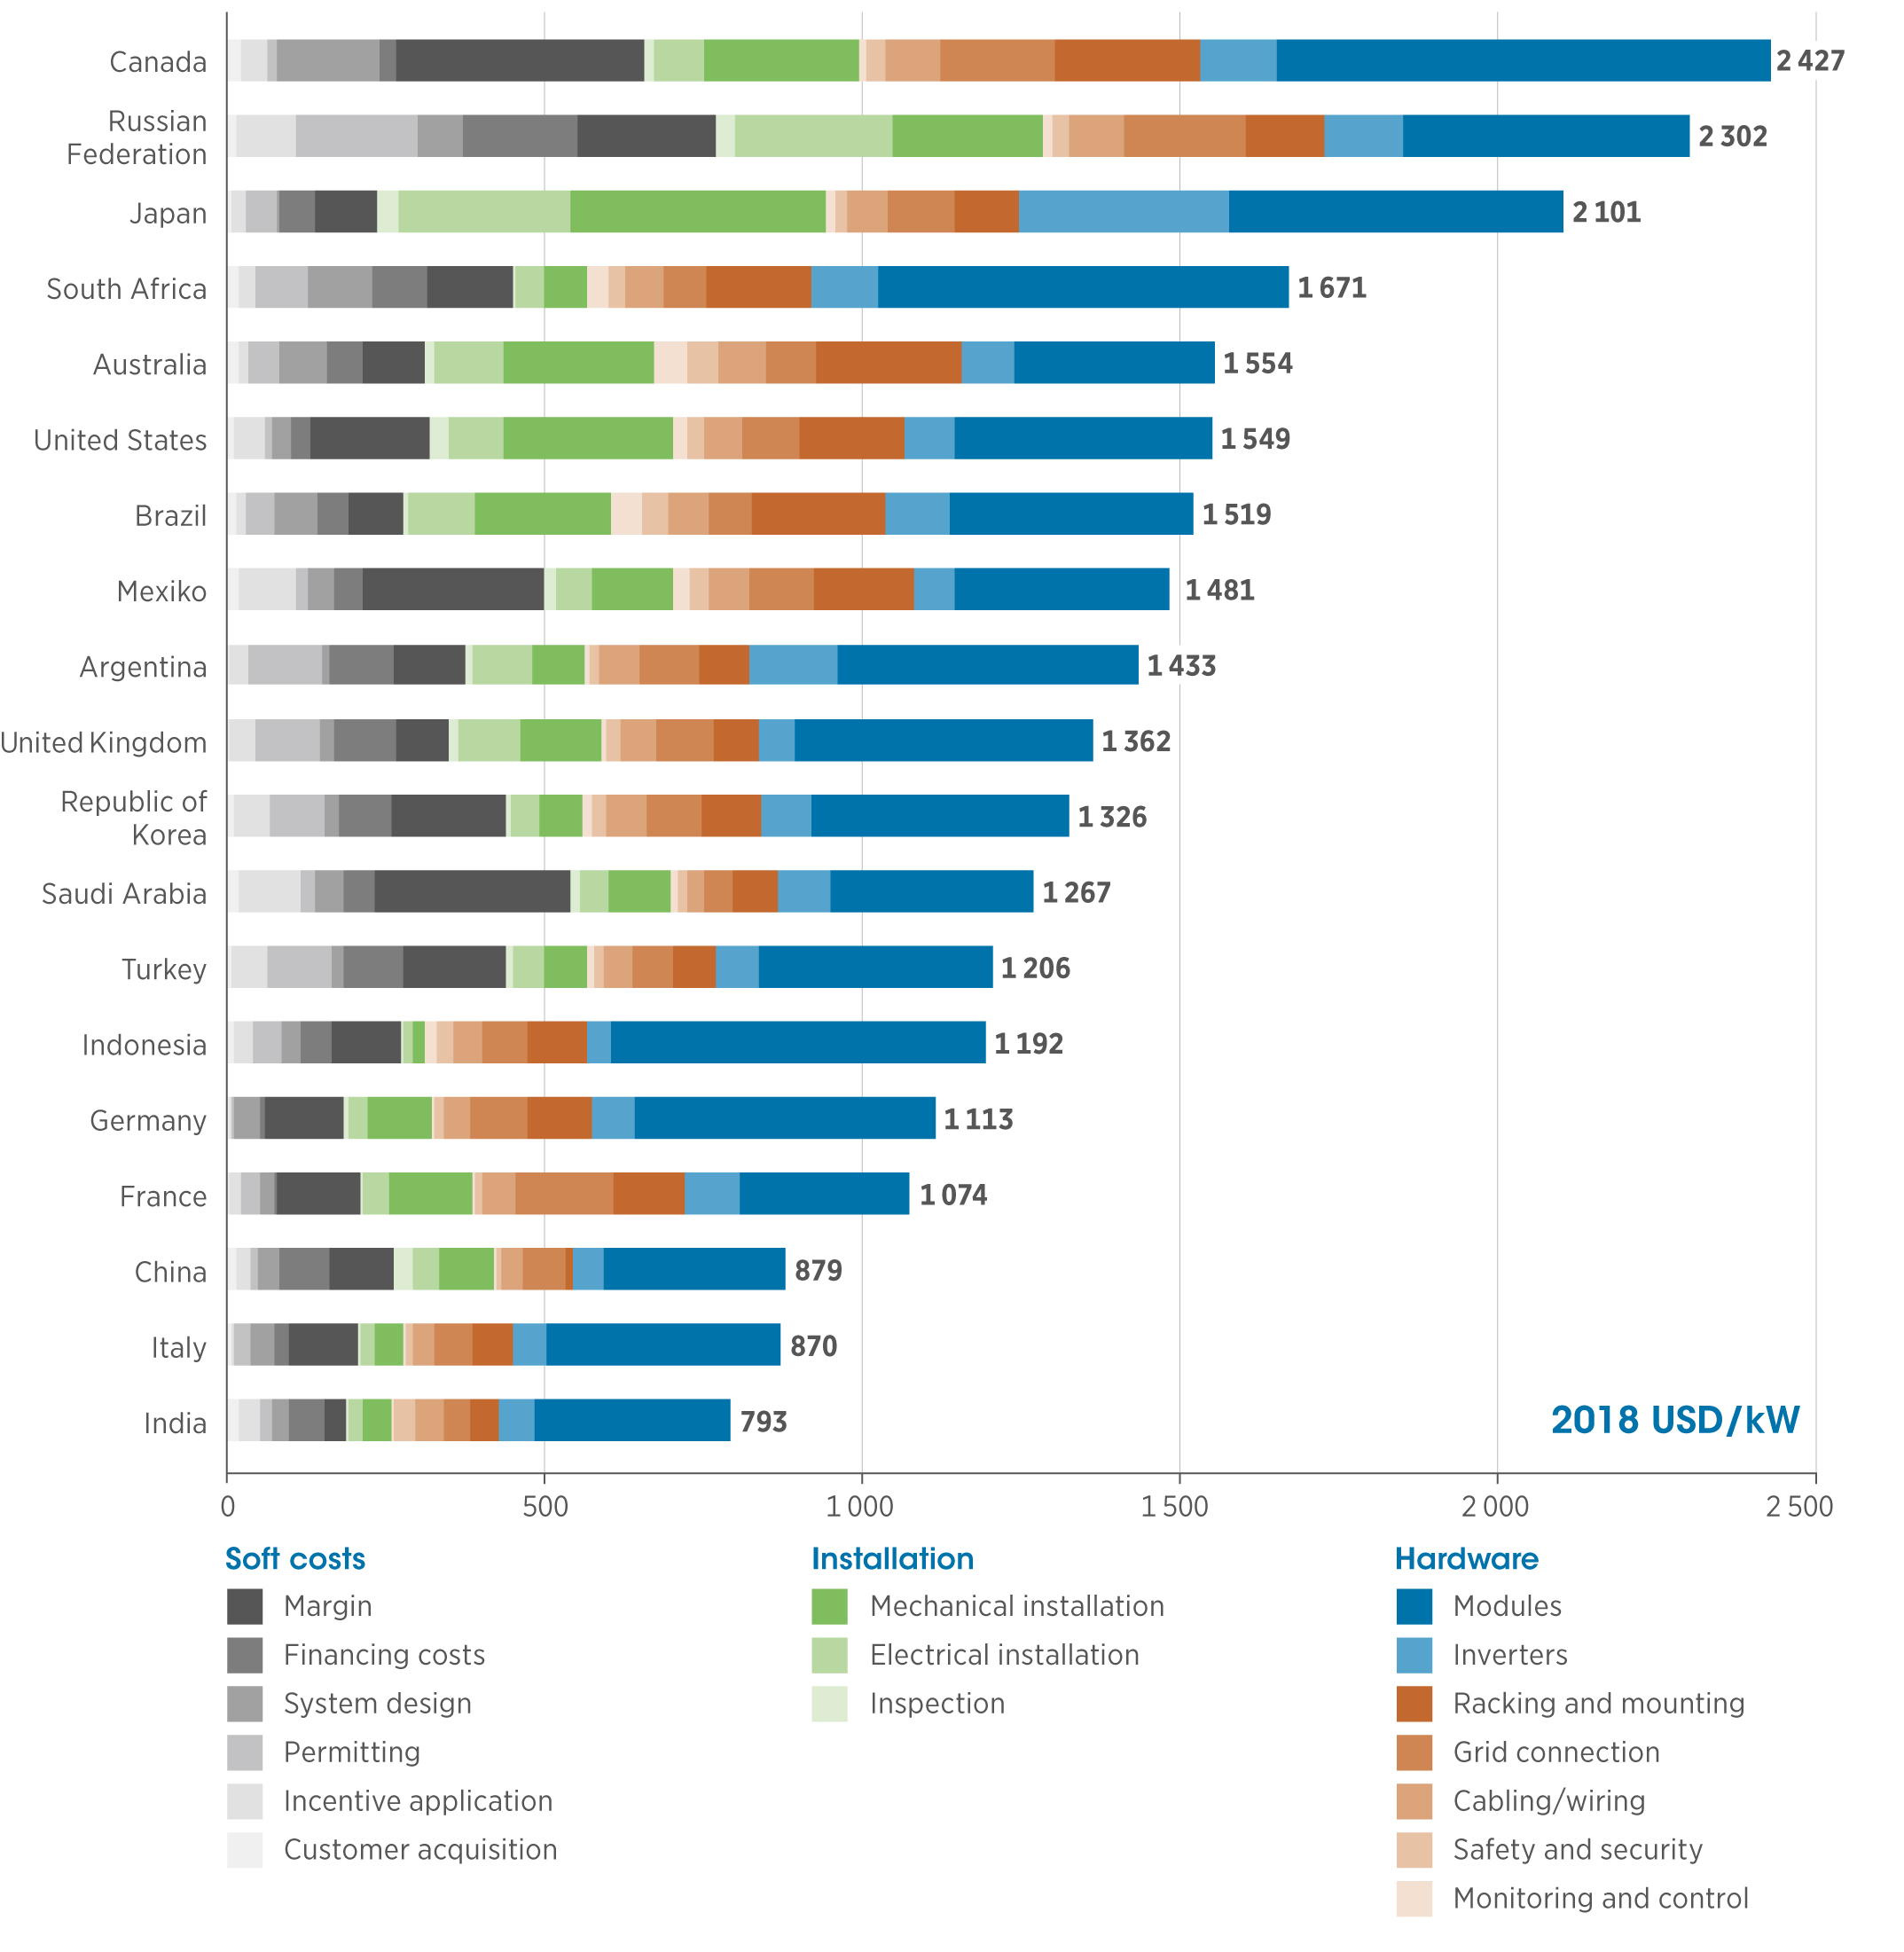 Fig. 3. Typical cost estimates for solar photovoltaic systems in the G20 contries, 2018 countries. Source: IRENA - Report 